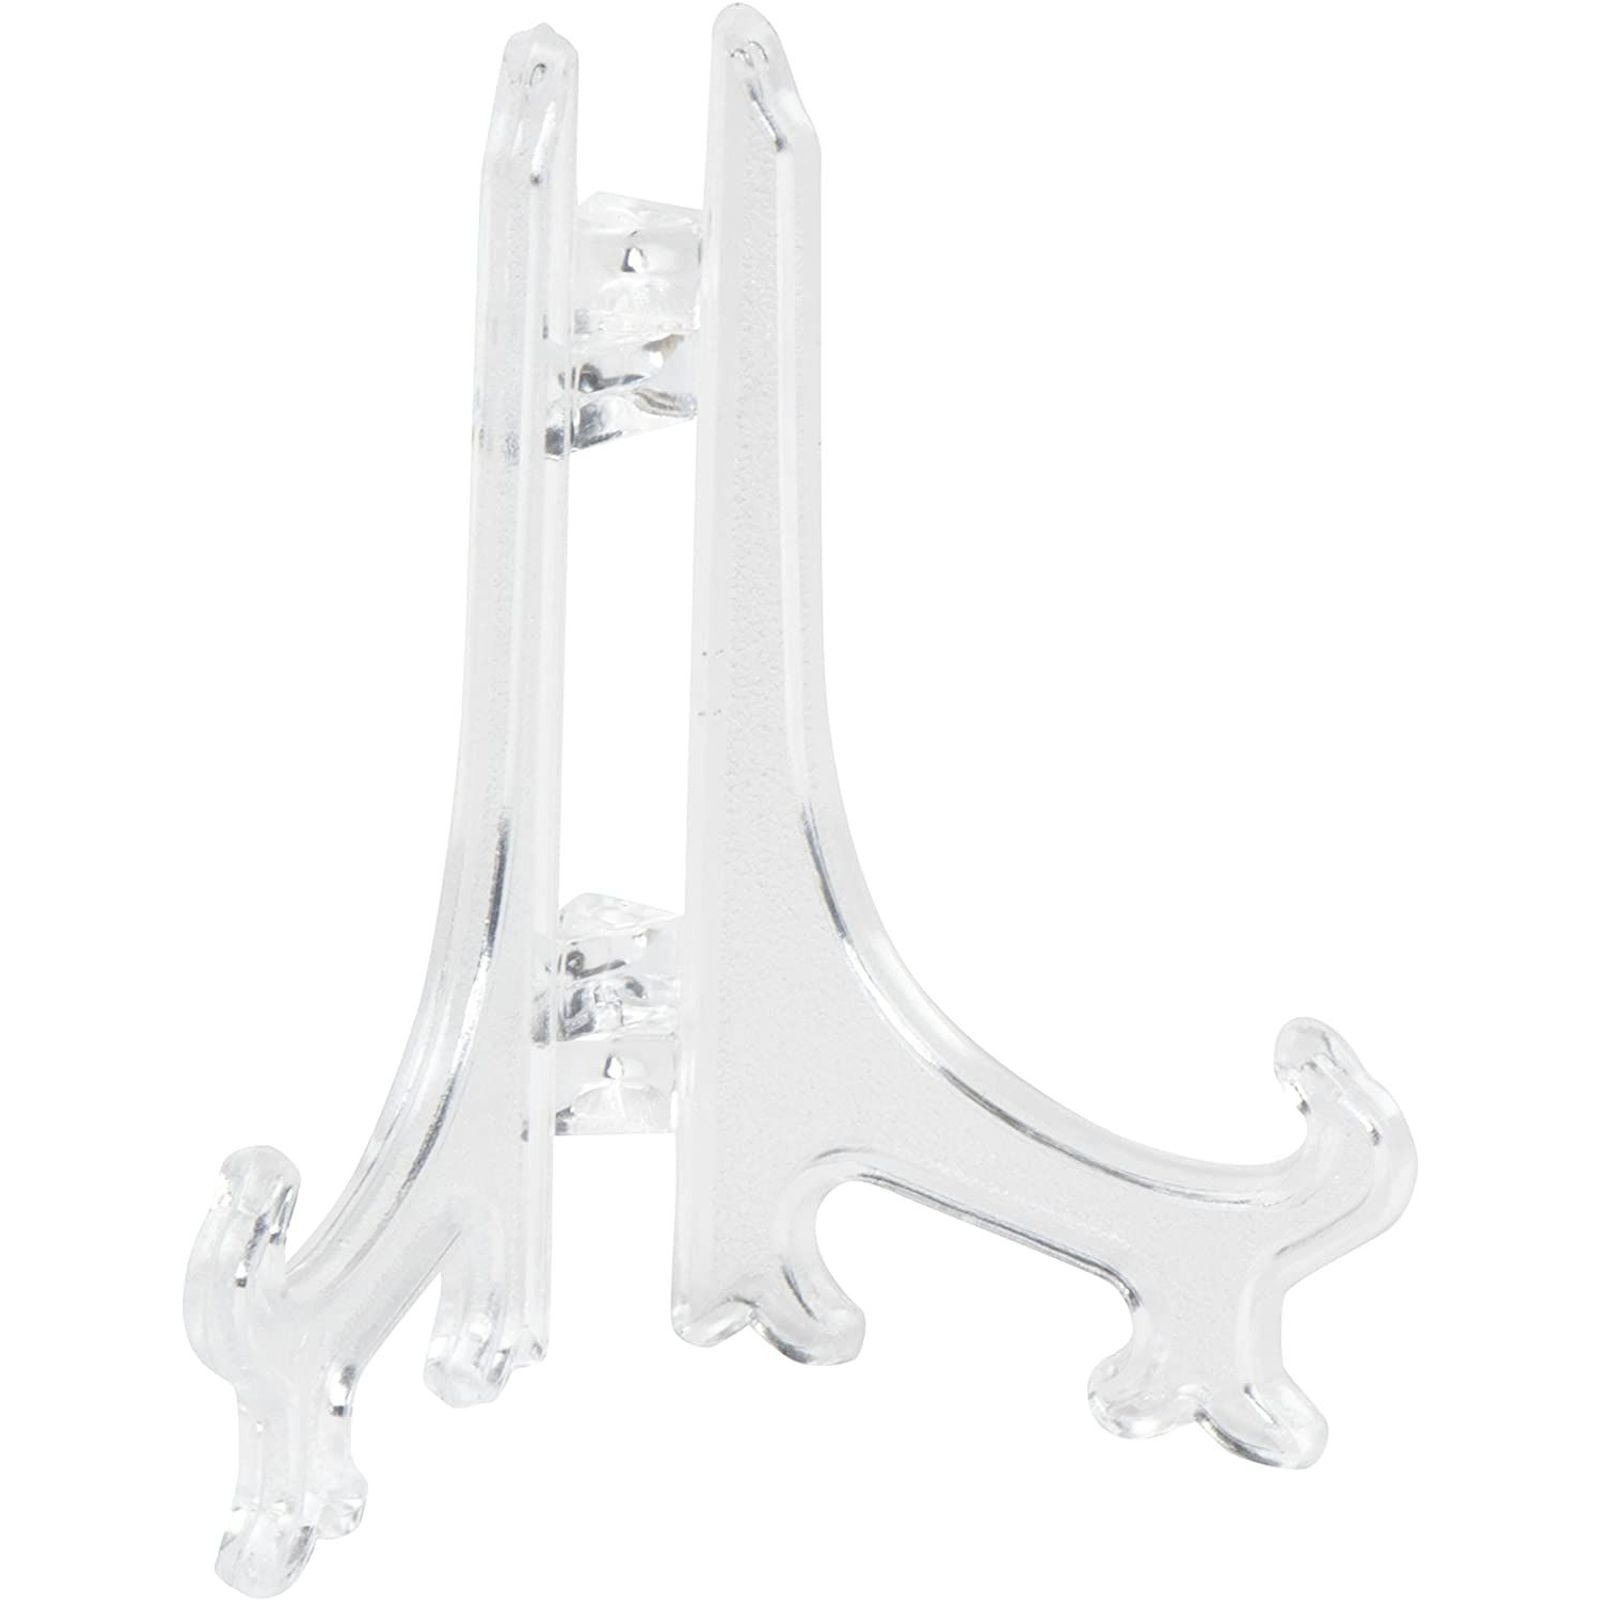 Portable Display Stand Easels Plate Holders Picture Photo Art Plastic Home Decor 